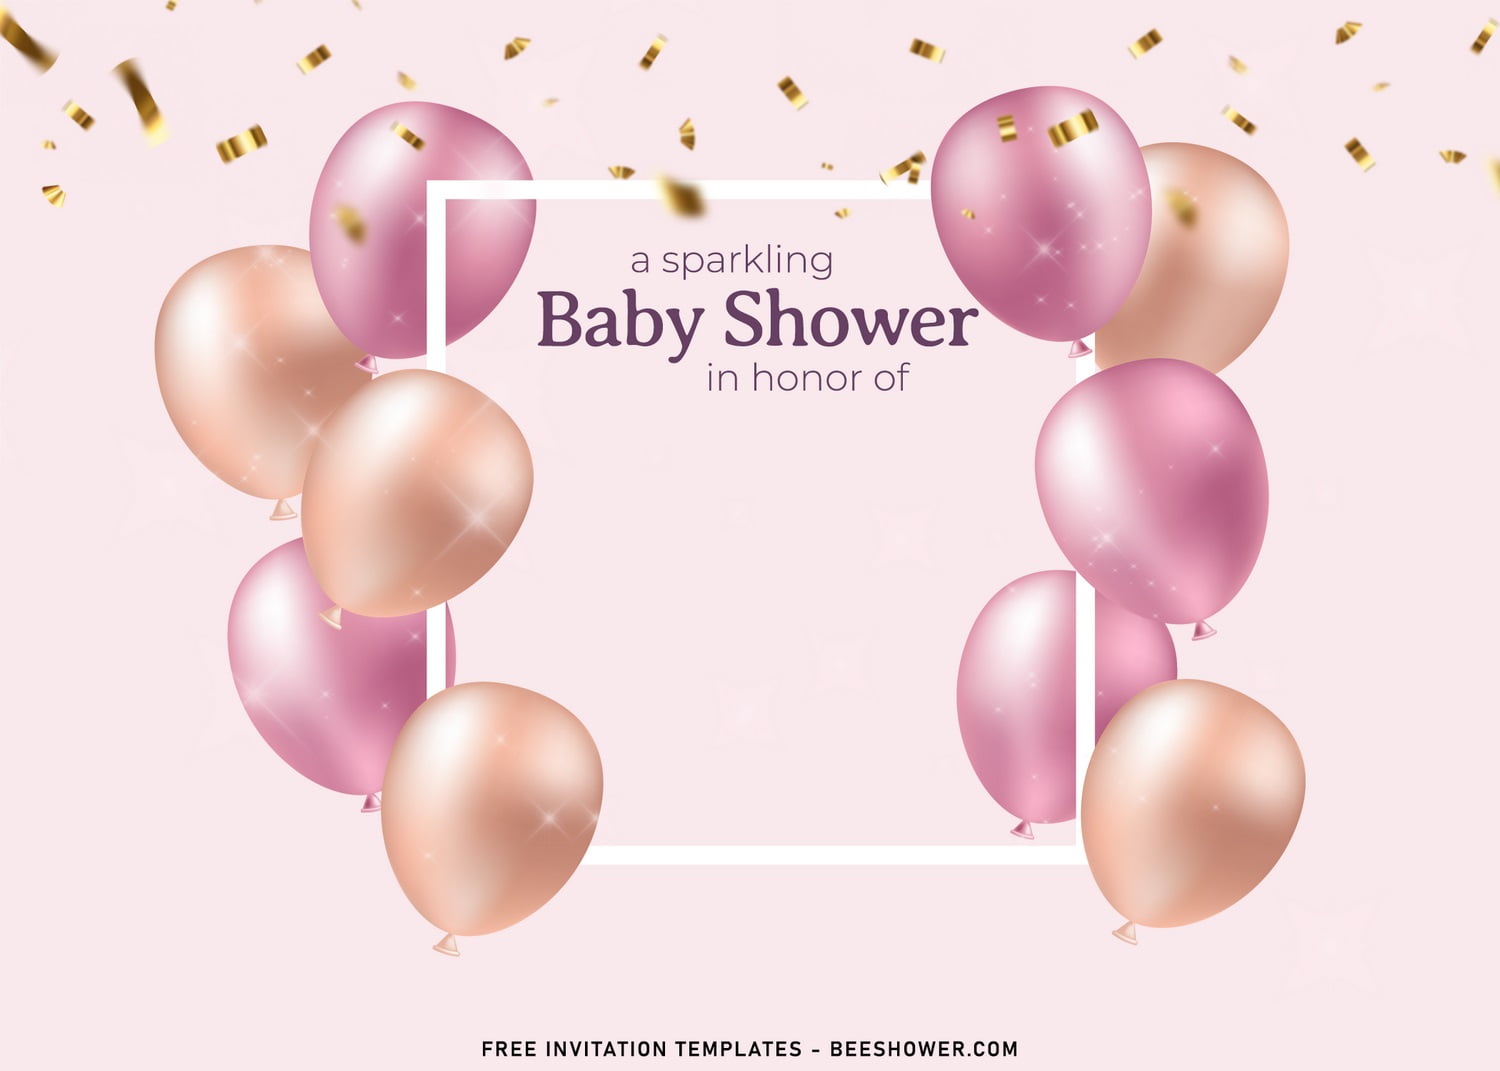 Download Image Of 10 Sparkling Balloons Birthday Invitation Templates